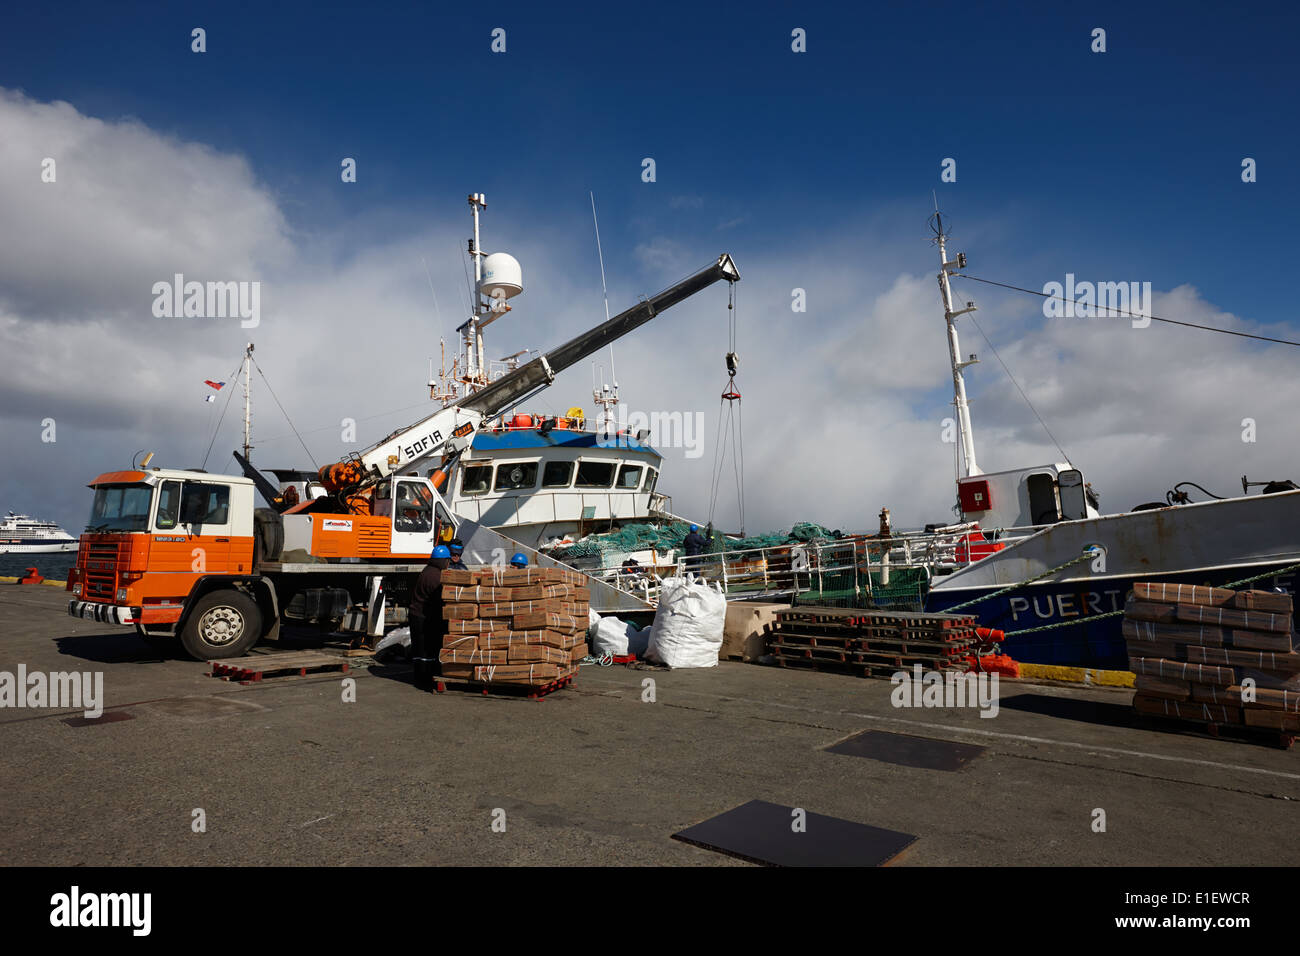 unloading patagonian toothfish from puerto ballena fishing boat at quay in Punta Arenas port Chile Stock Photo